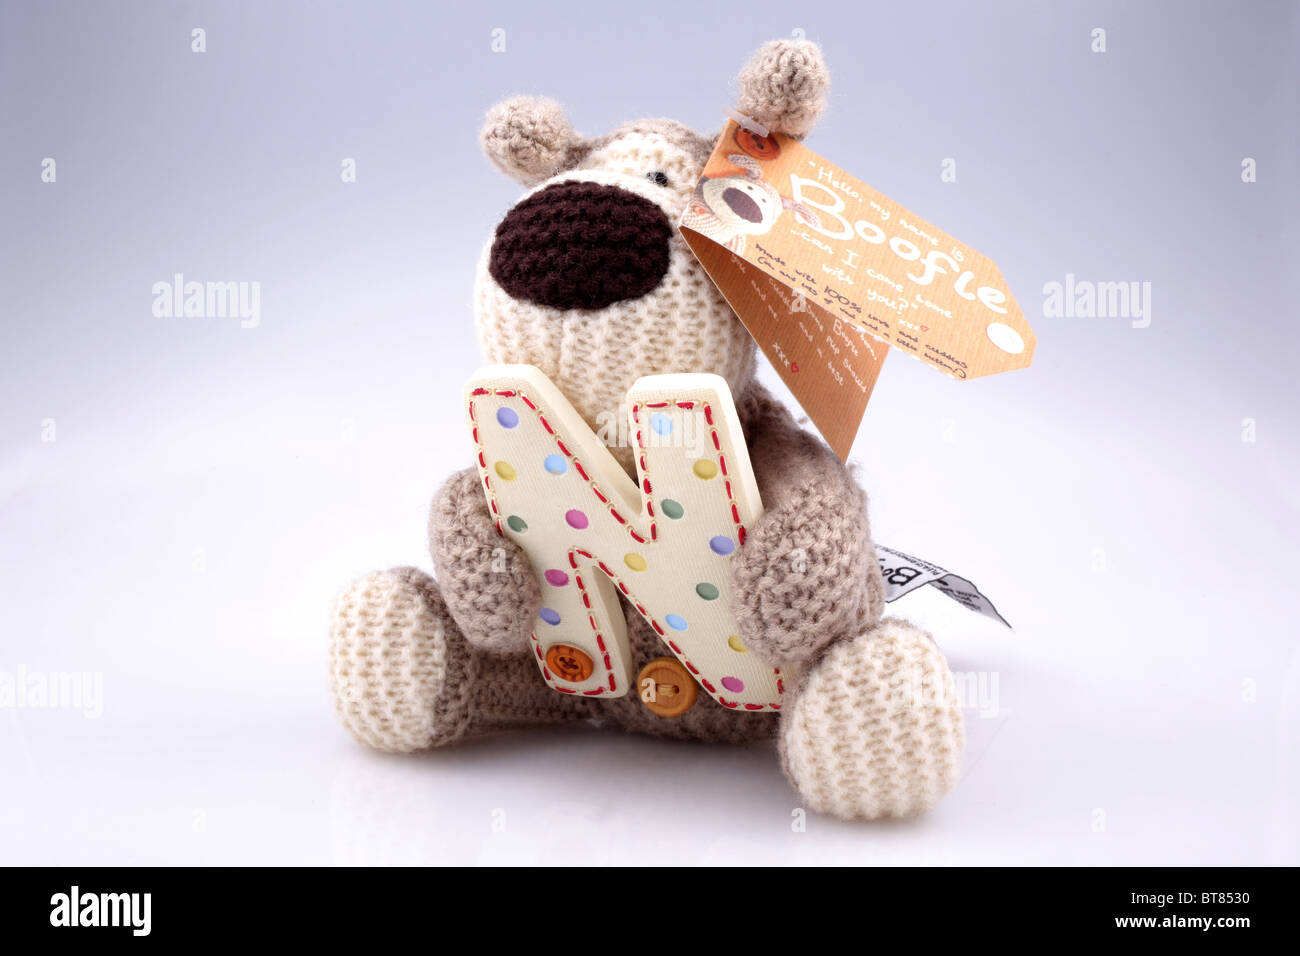 Stuffed toy bear of character Boofle holding the letter 'N'. Stock Photo